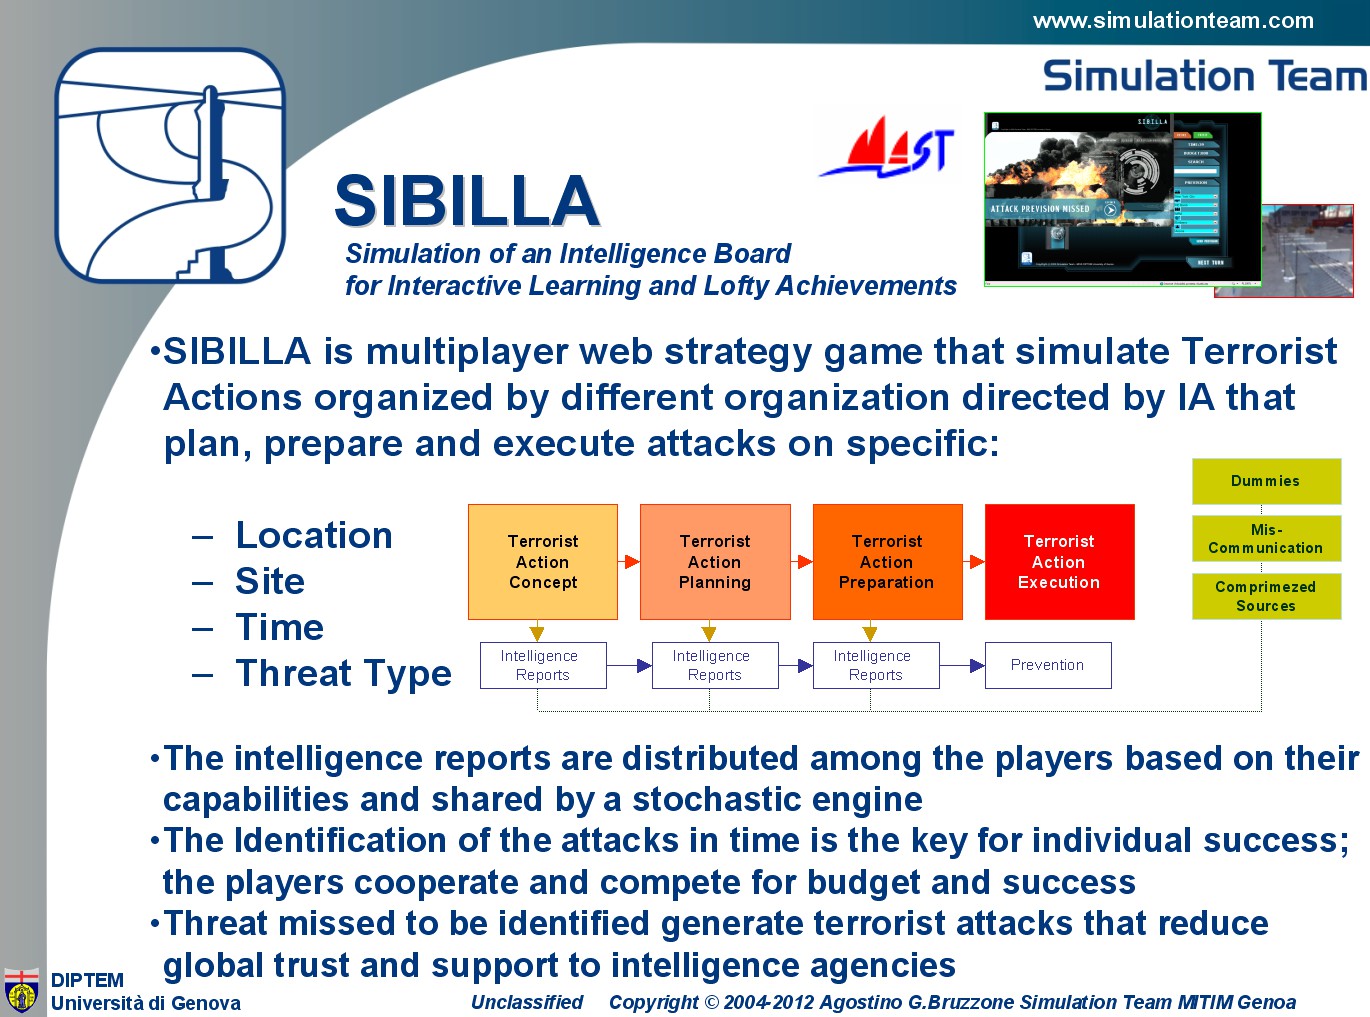 Web Based Multi Player Serious Game for Simulating Homeland Security and Using Intelligent Agents to plan Terrorist Attacks (i.e.CBRN, Cyber Attacks)